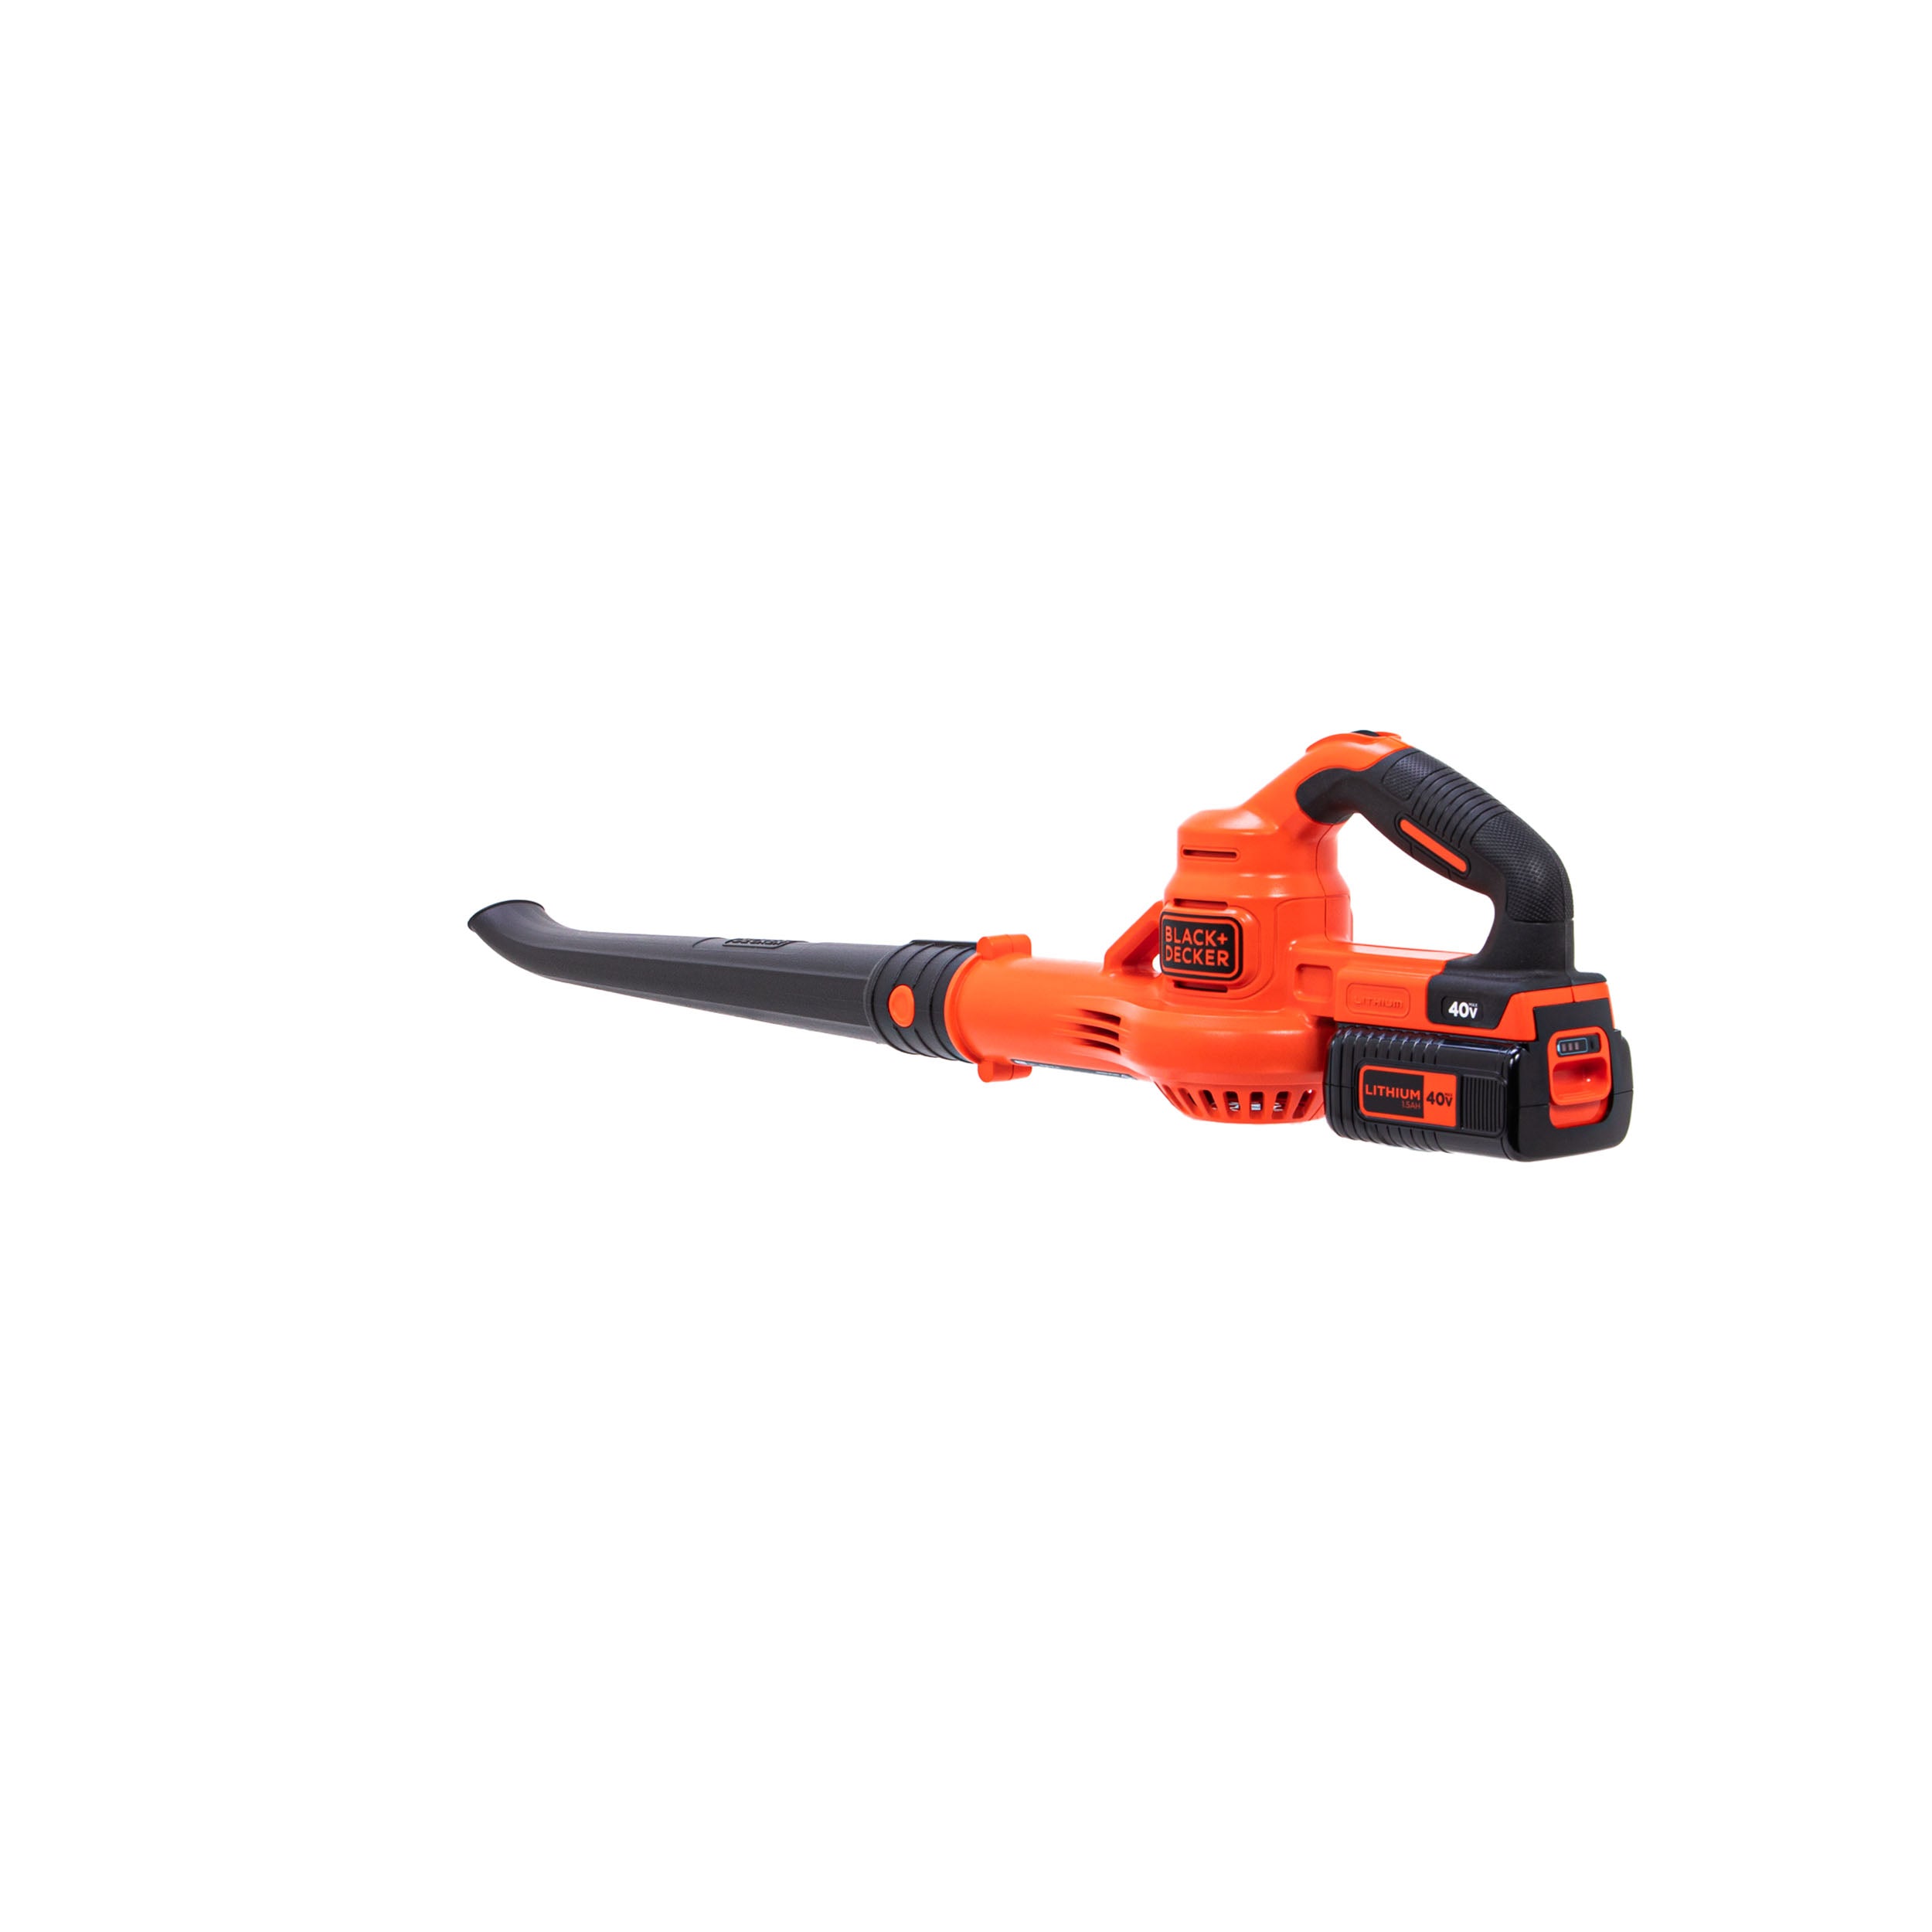 BLACK+DECKER 40V MAX Cordless Leaf Blower, Lawn Sweeper, 125 mph Air Speed,  Lightweight Design, Battery and Charger Included (LSW40C)